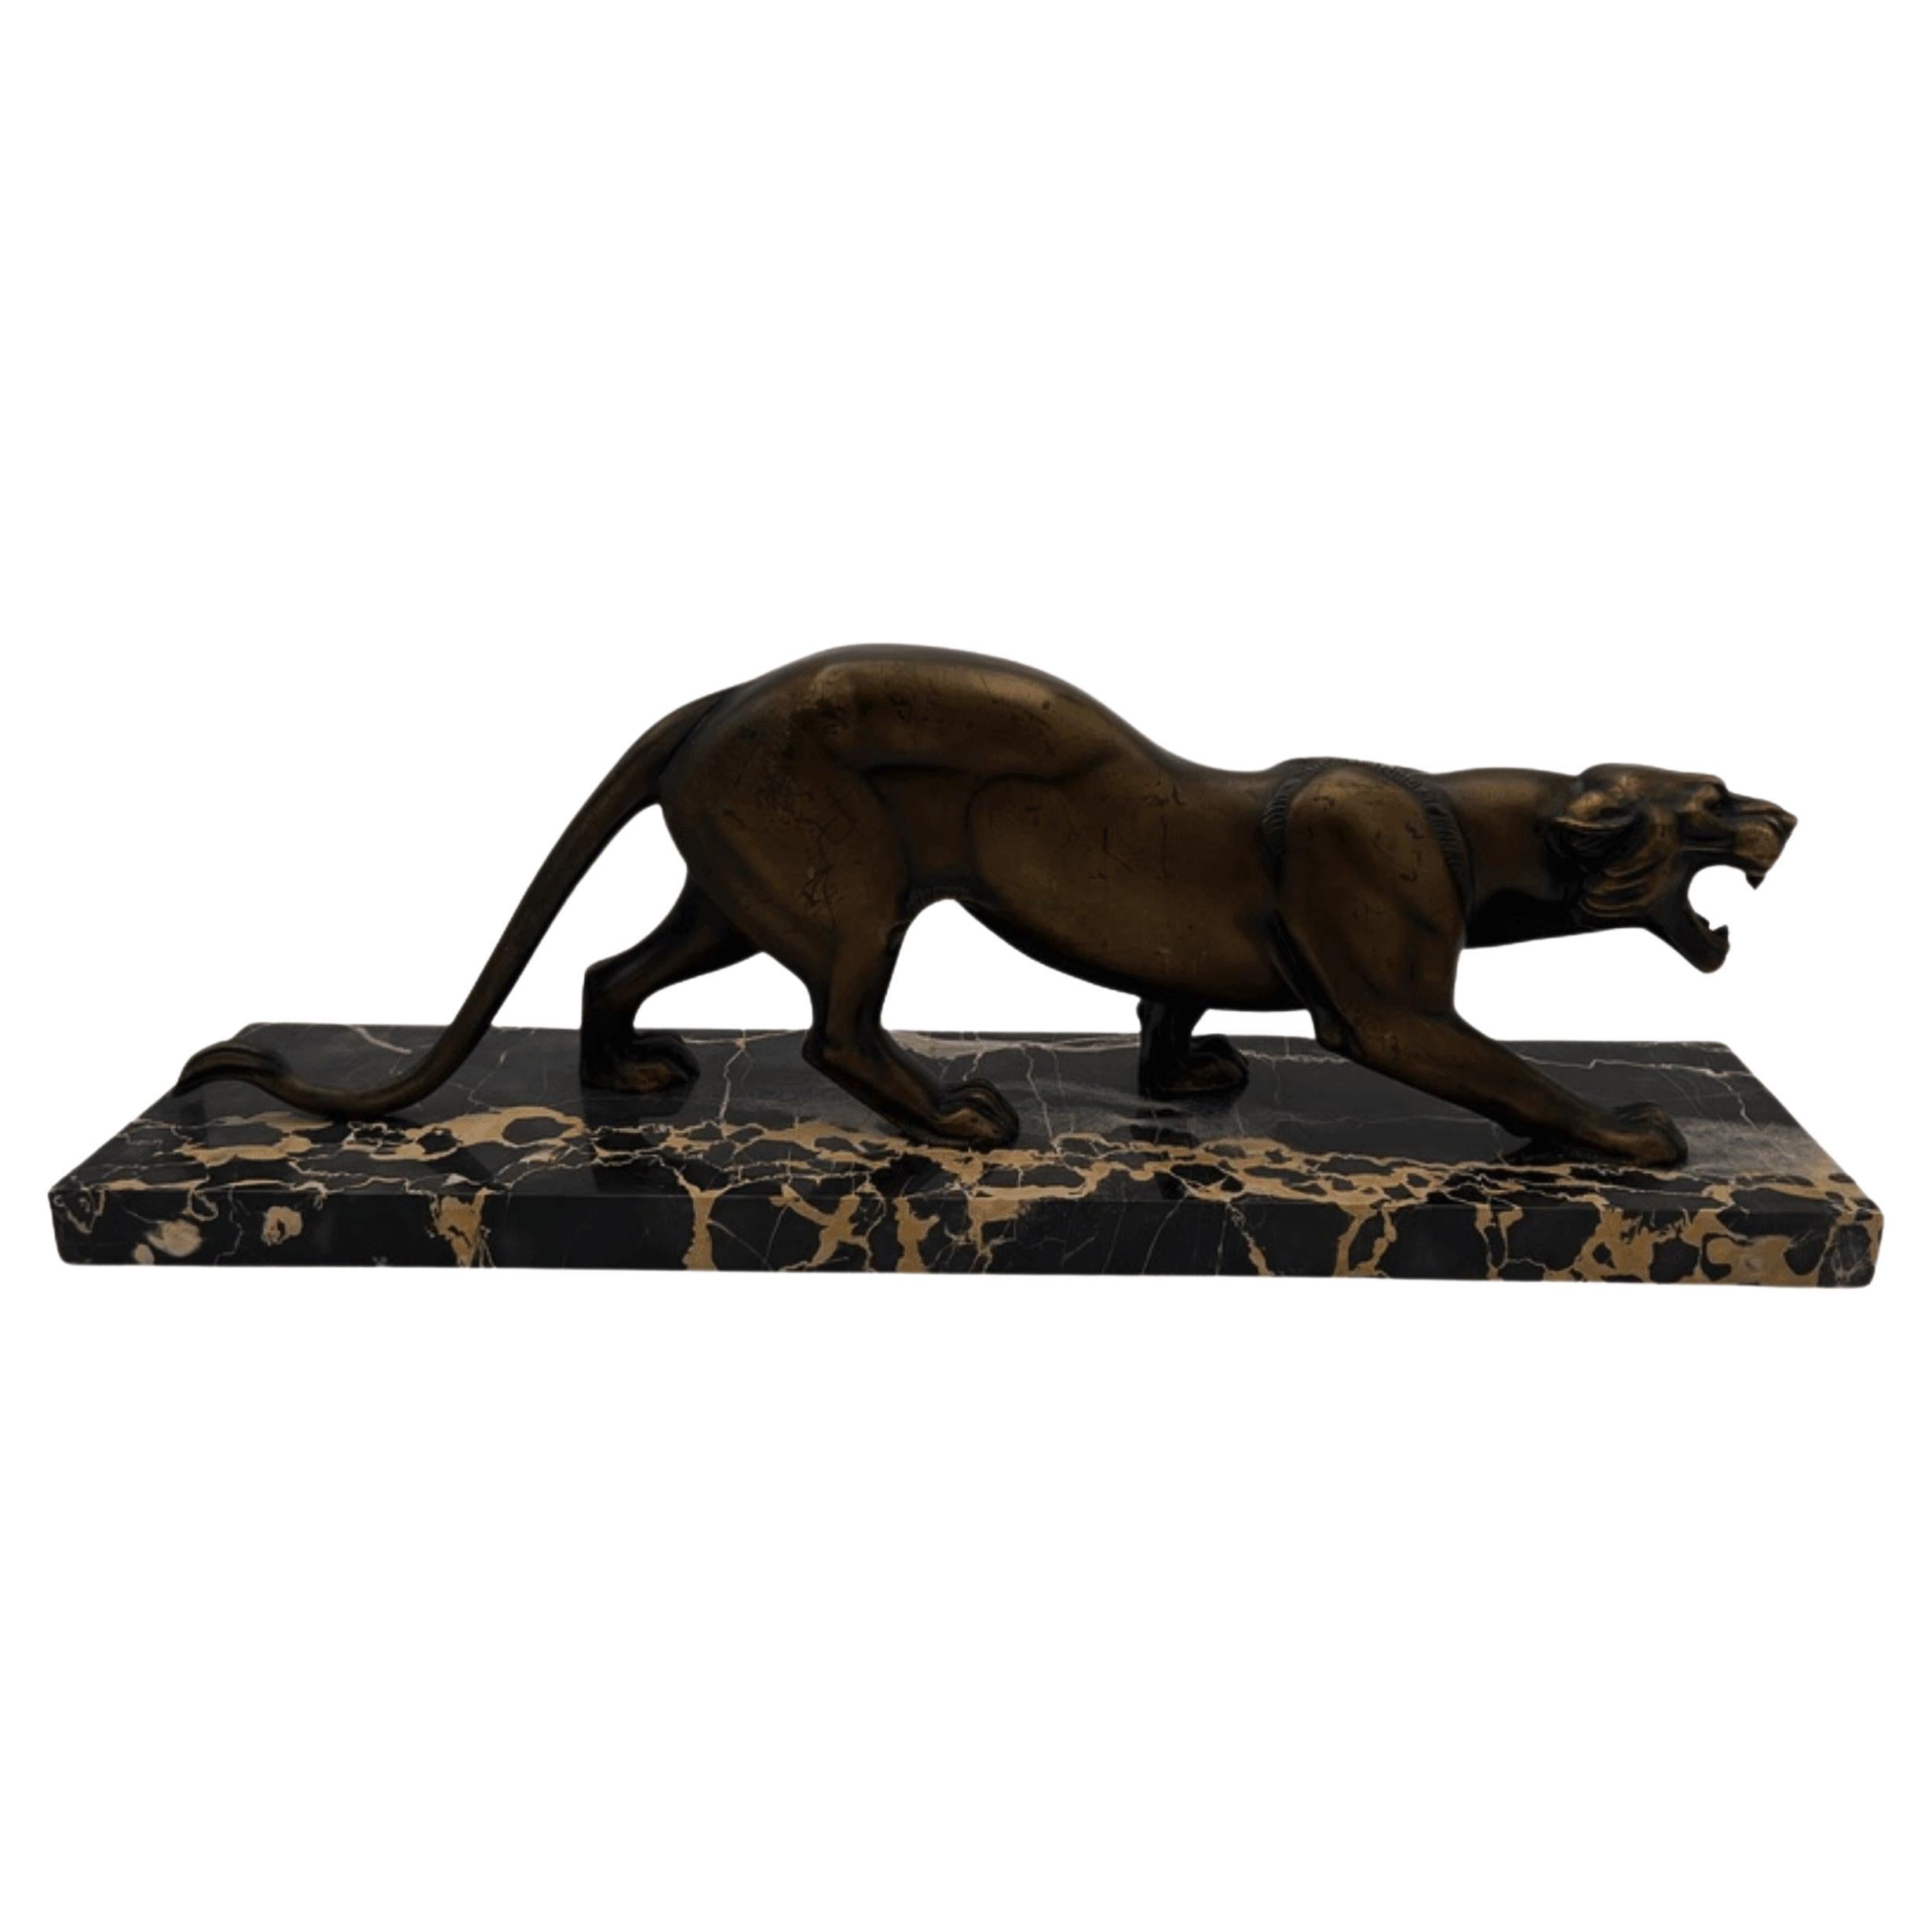 Art Deco Sculpture of a Panther, Bronze Cast, Marble, France circa 1930 For Sale